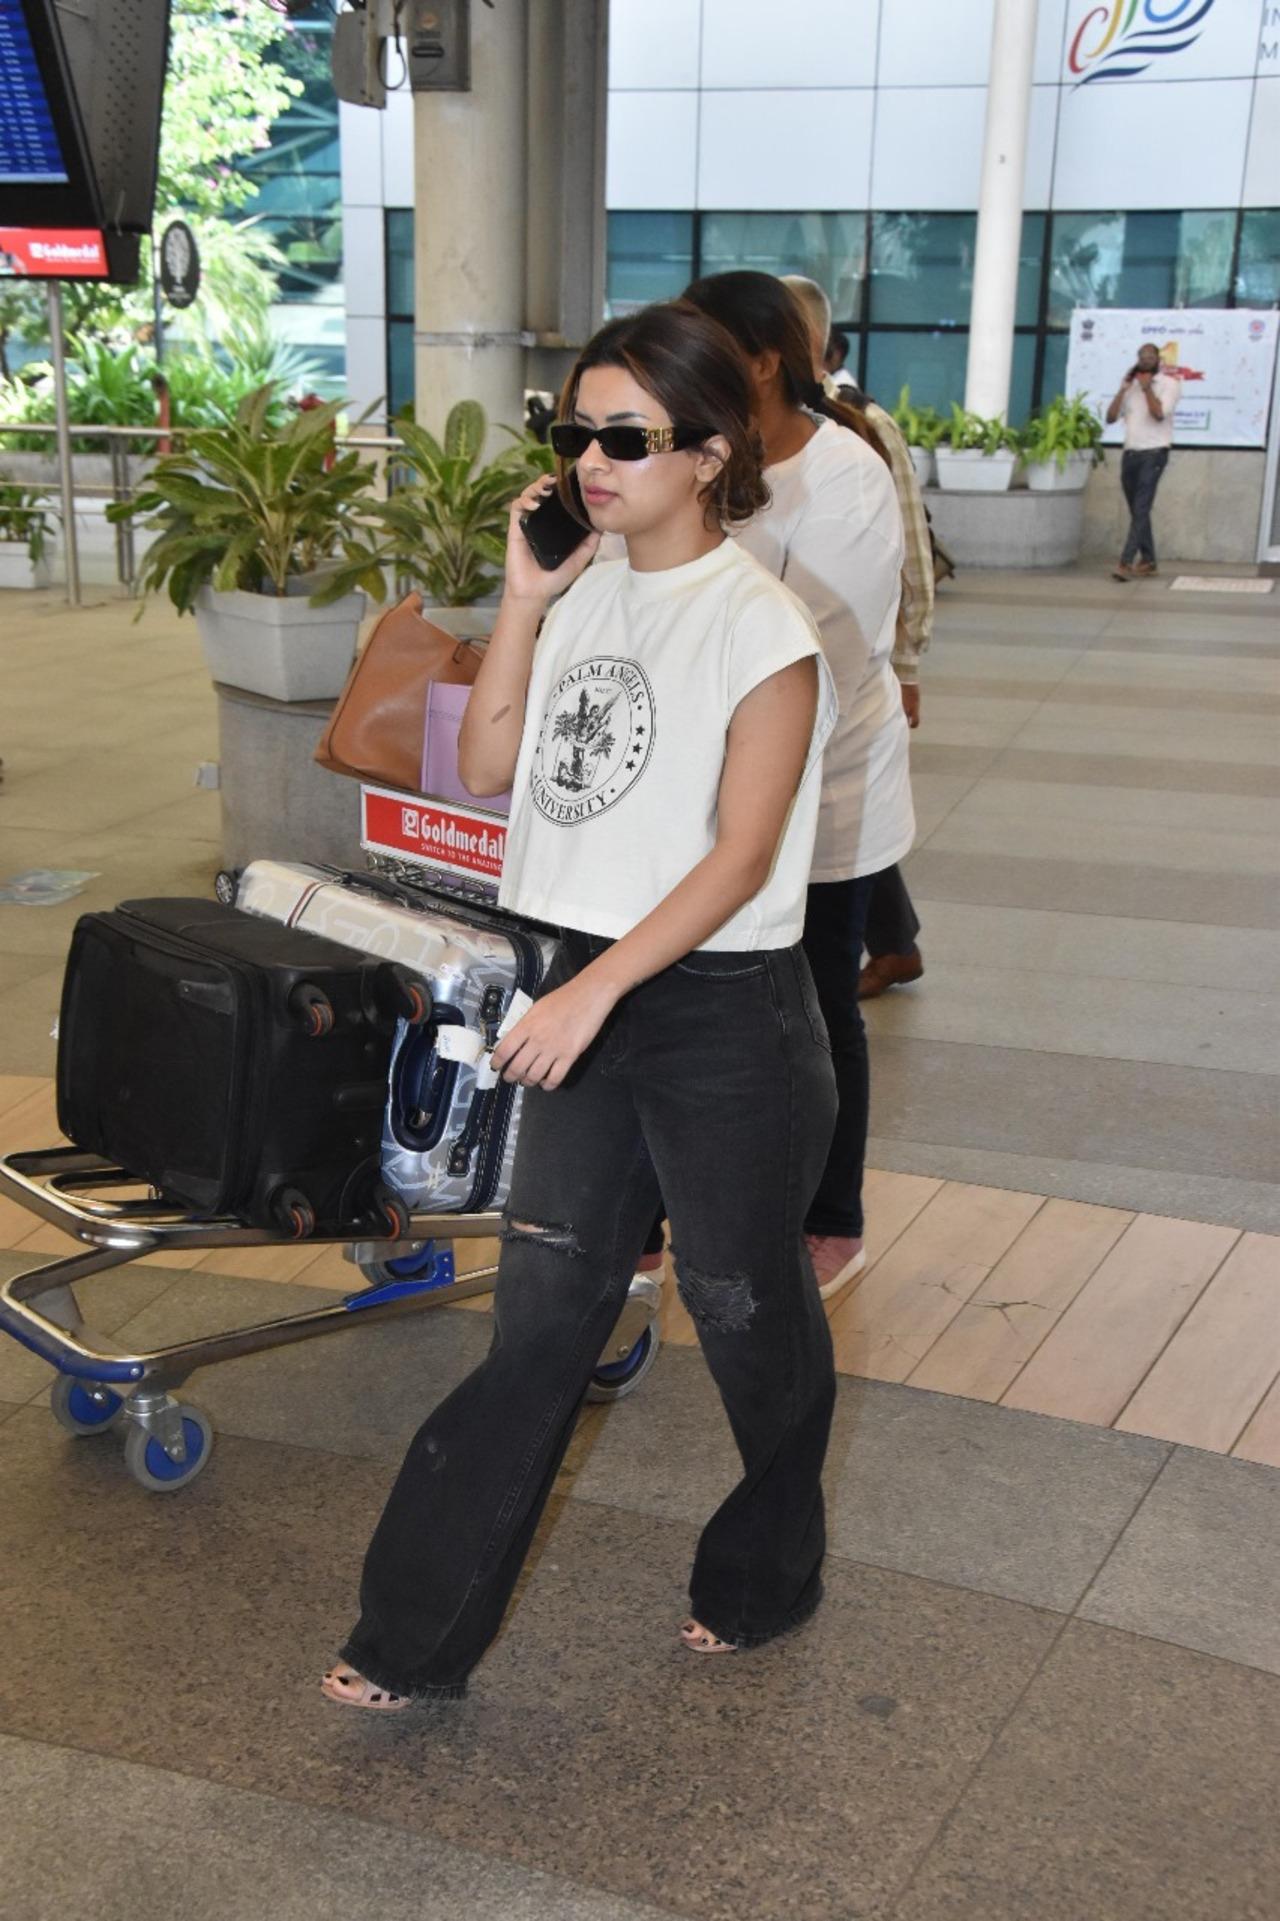 Avneet Kaur was wearing a white crop top with a gray pair of slacks, and she appeared engrossed in a phone conversation as she departed the airport